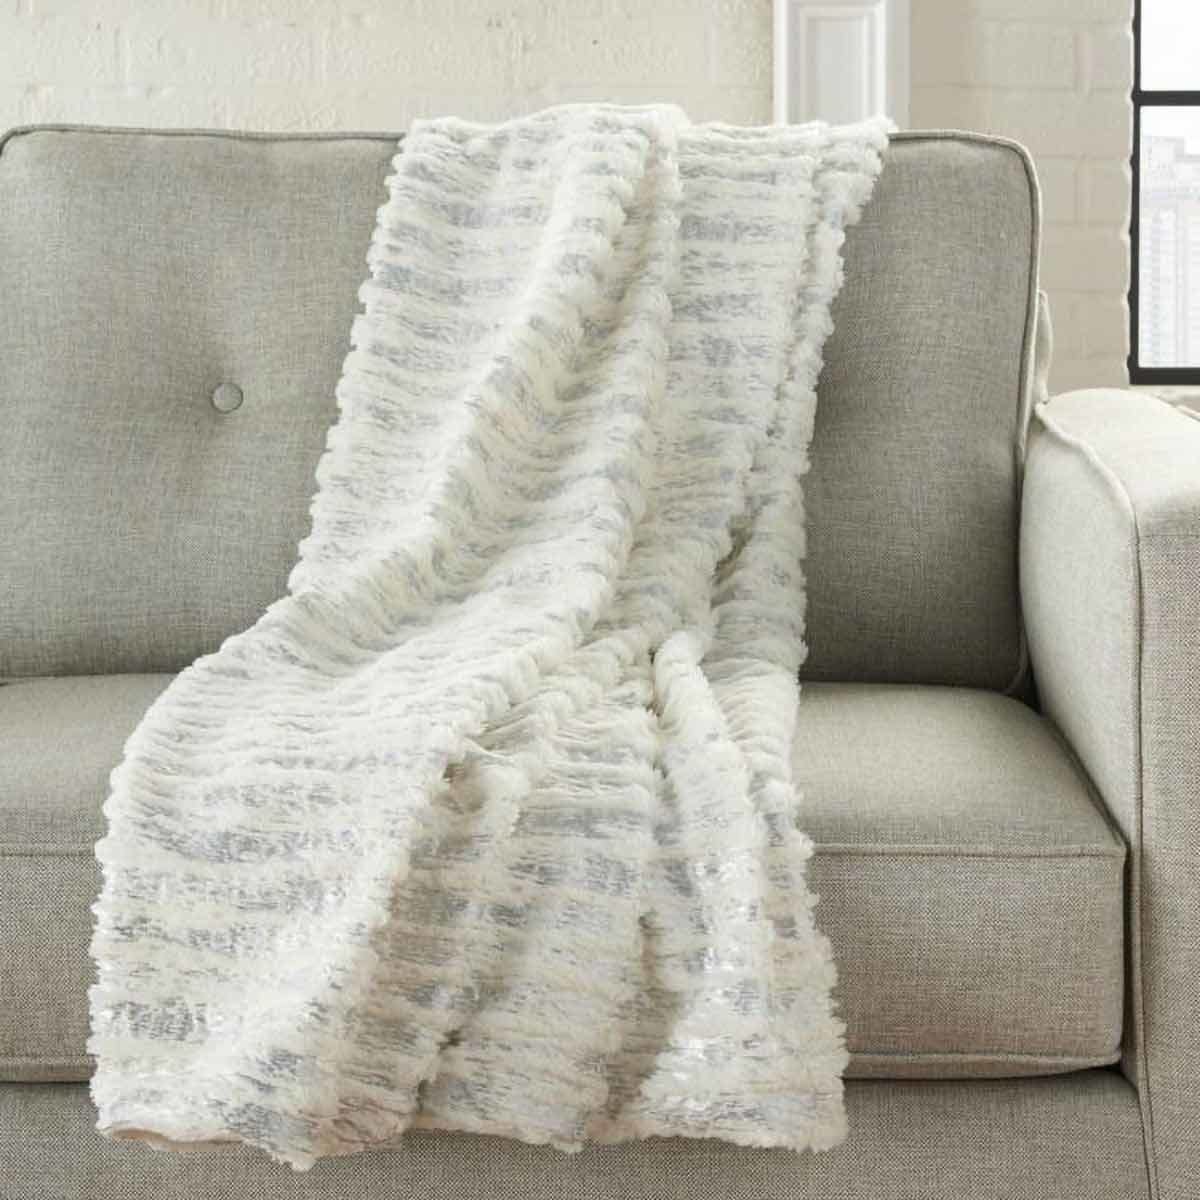 Faux Fur Throw Blanket on couch.